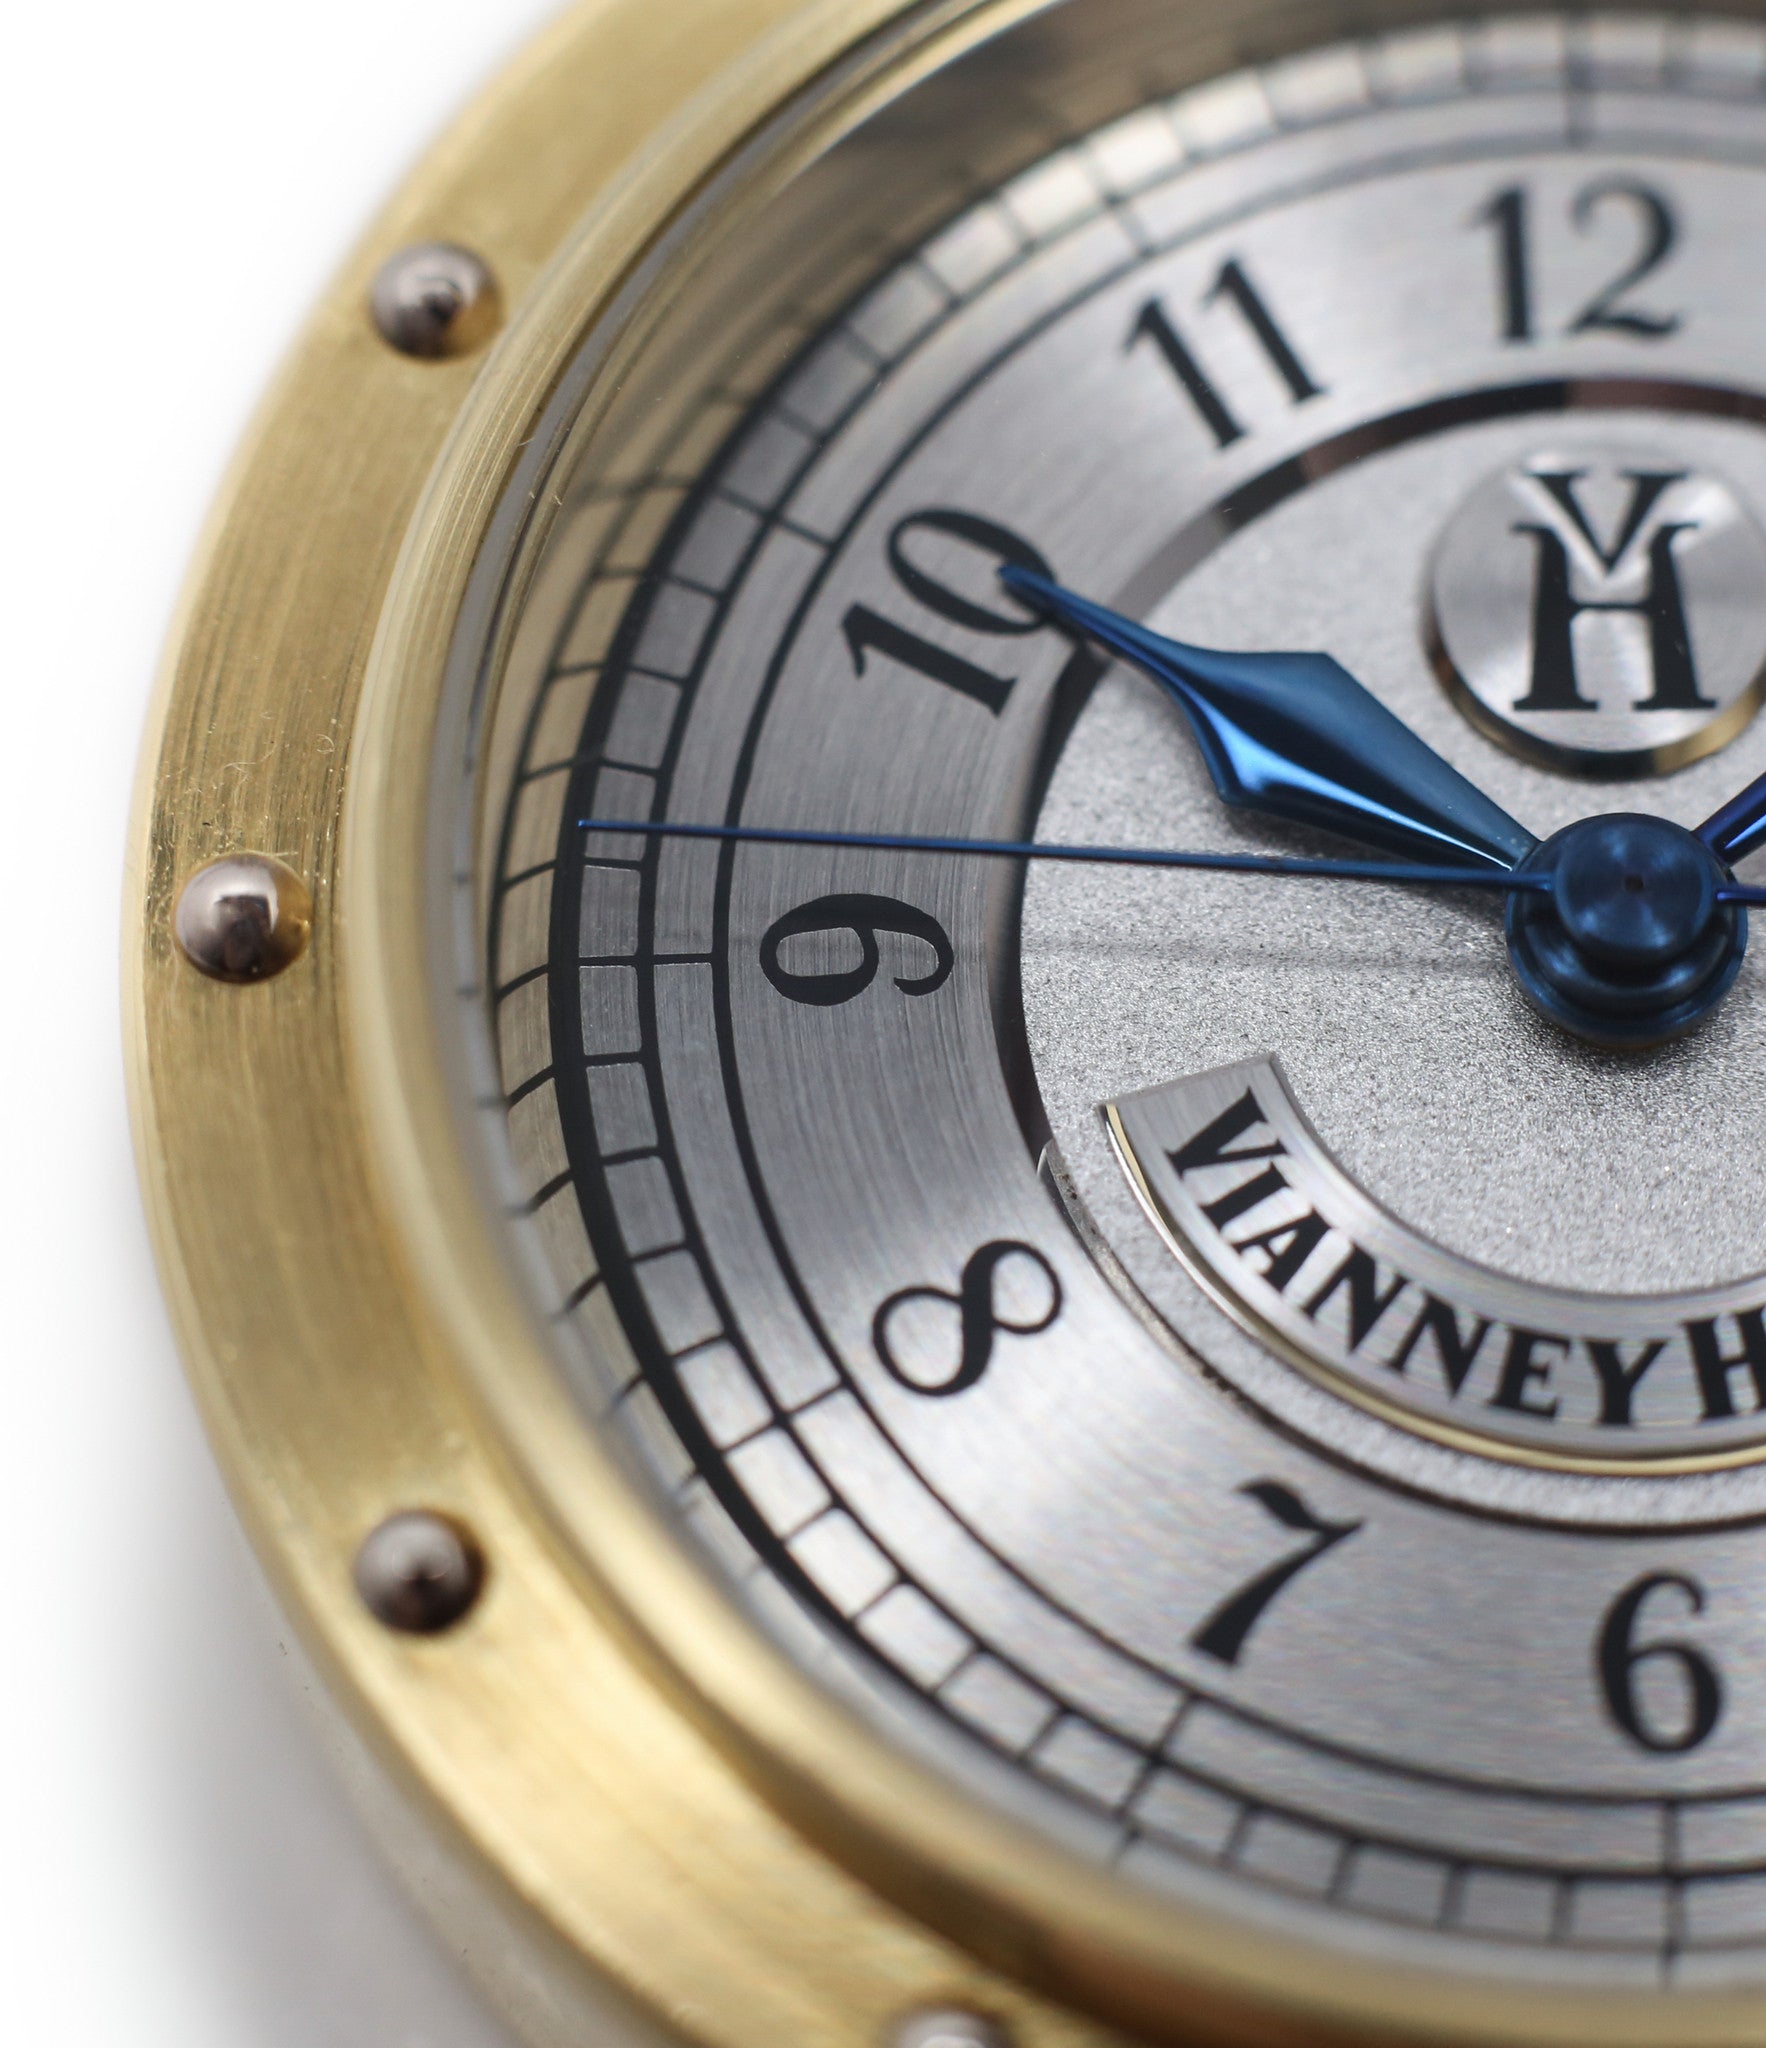 Arabic numerals buy Vianney Halter Classic yellow gold time-only dress watch at A Collected Man the approve seller of independent watchmakers